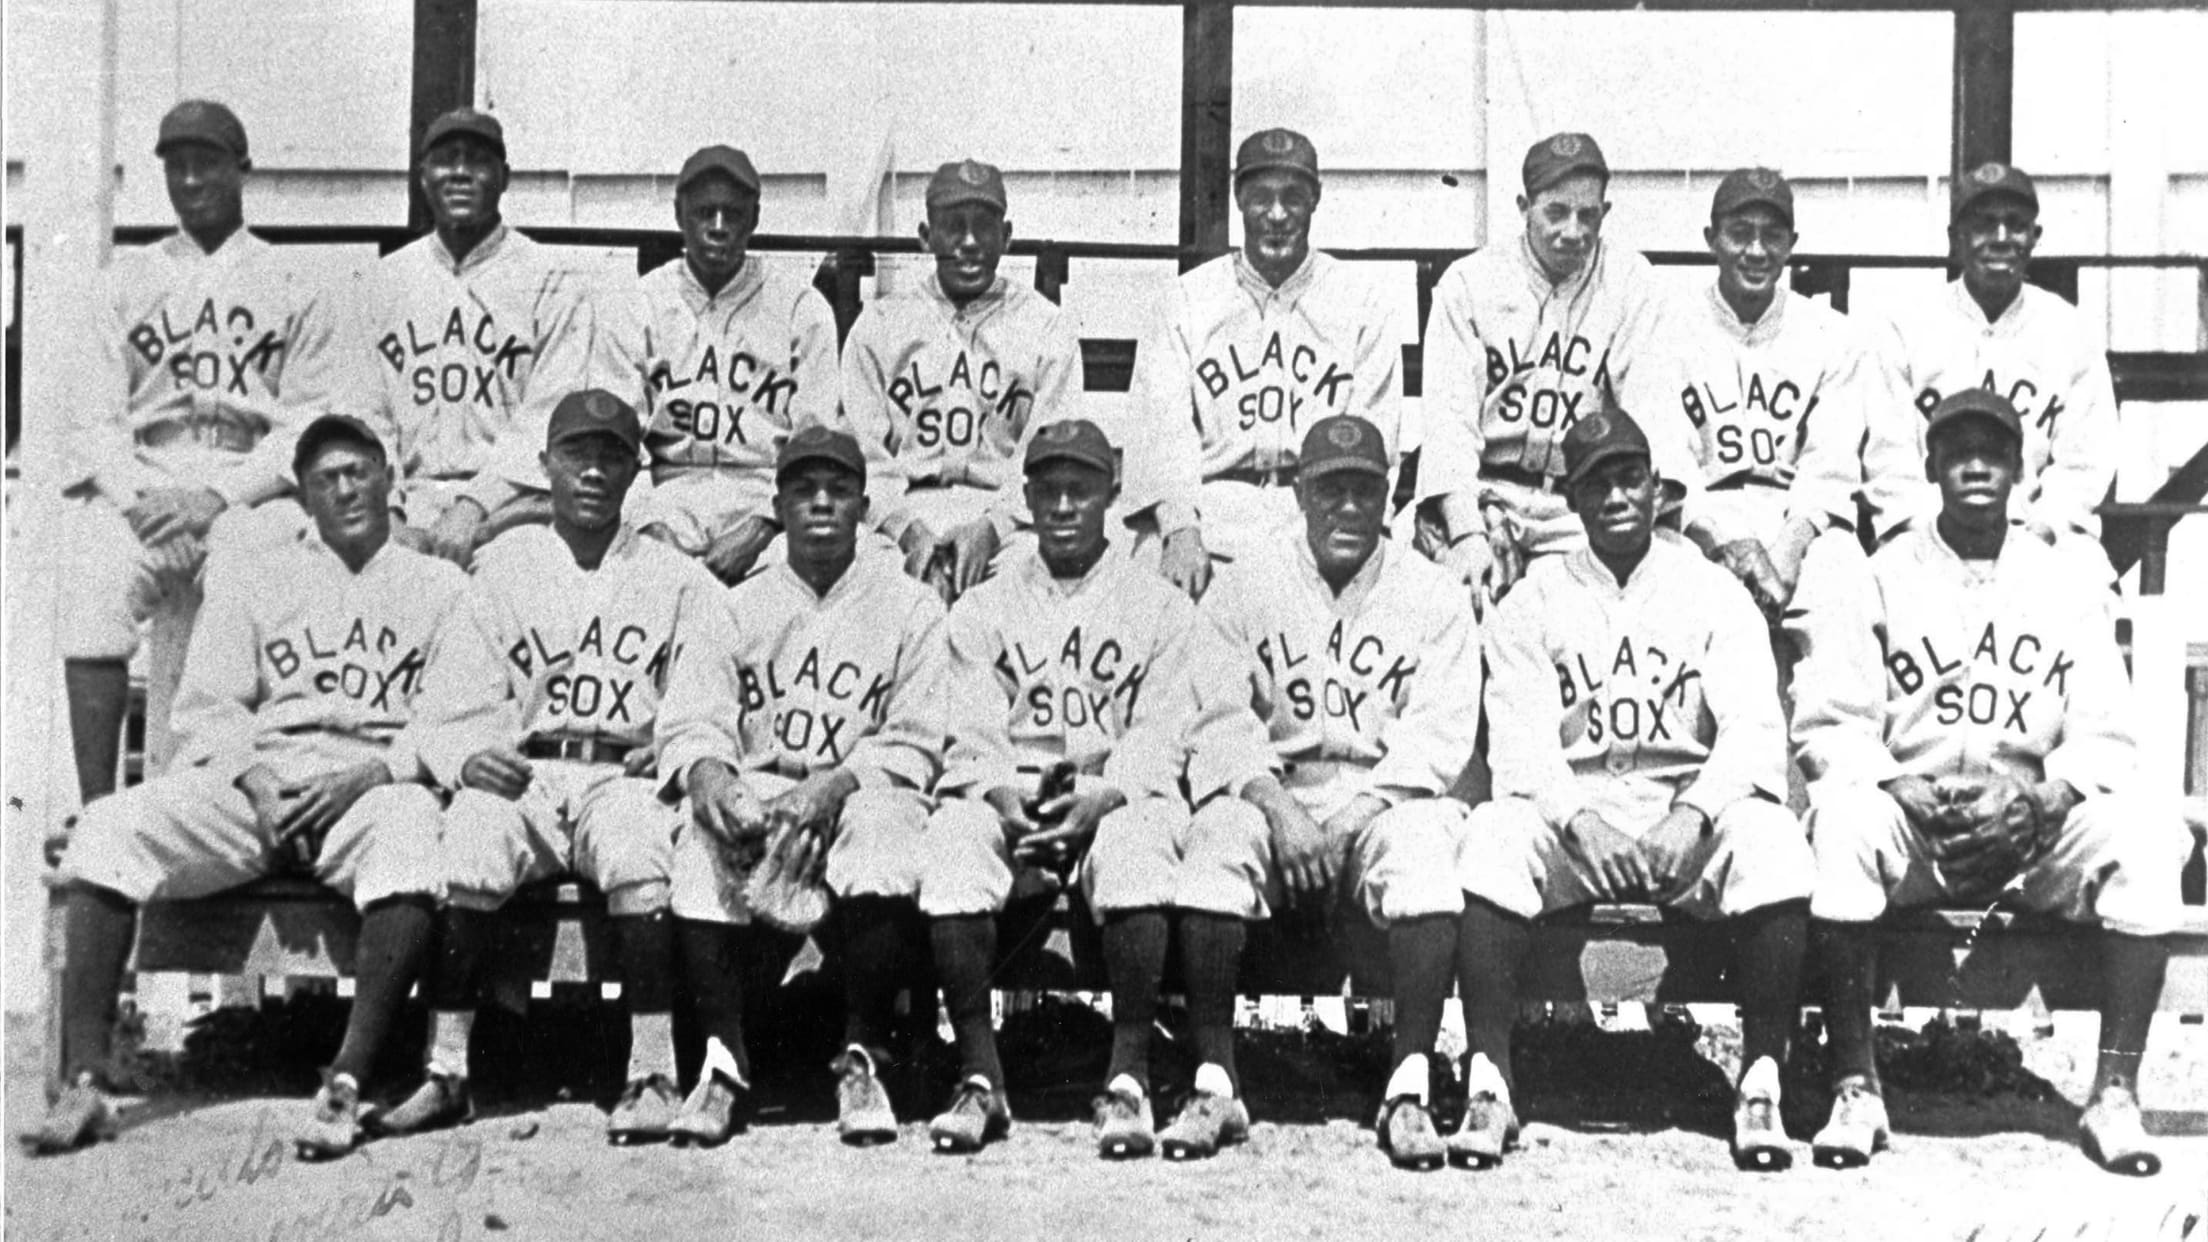 Celebrating 100th anniversary of Negro Leagues